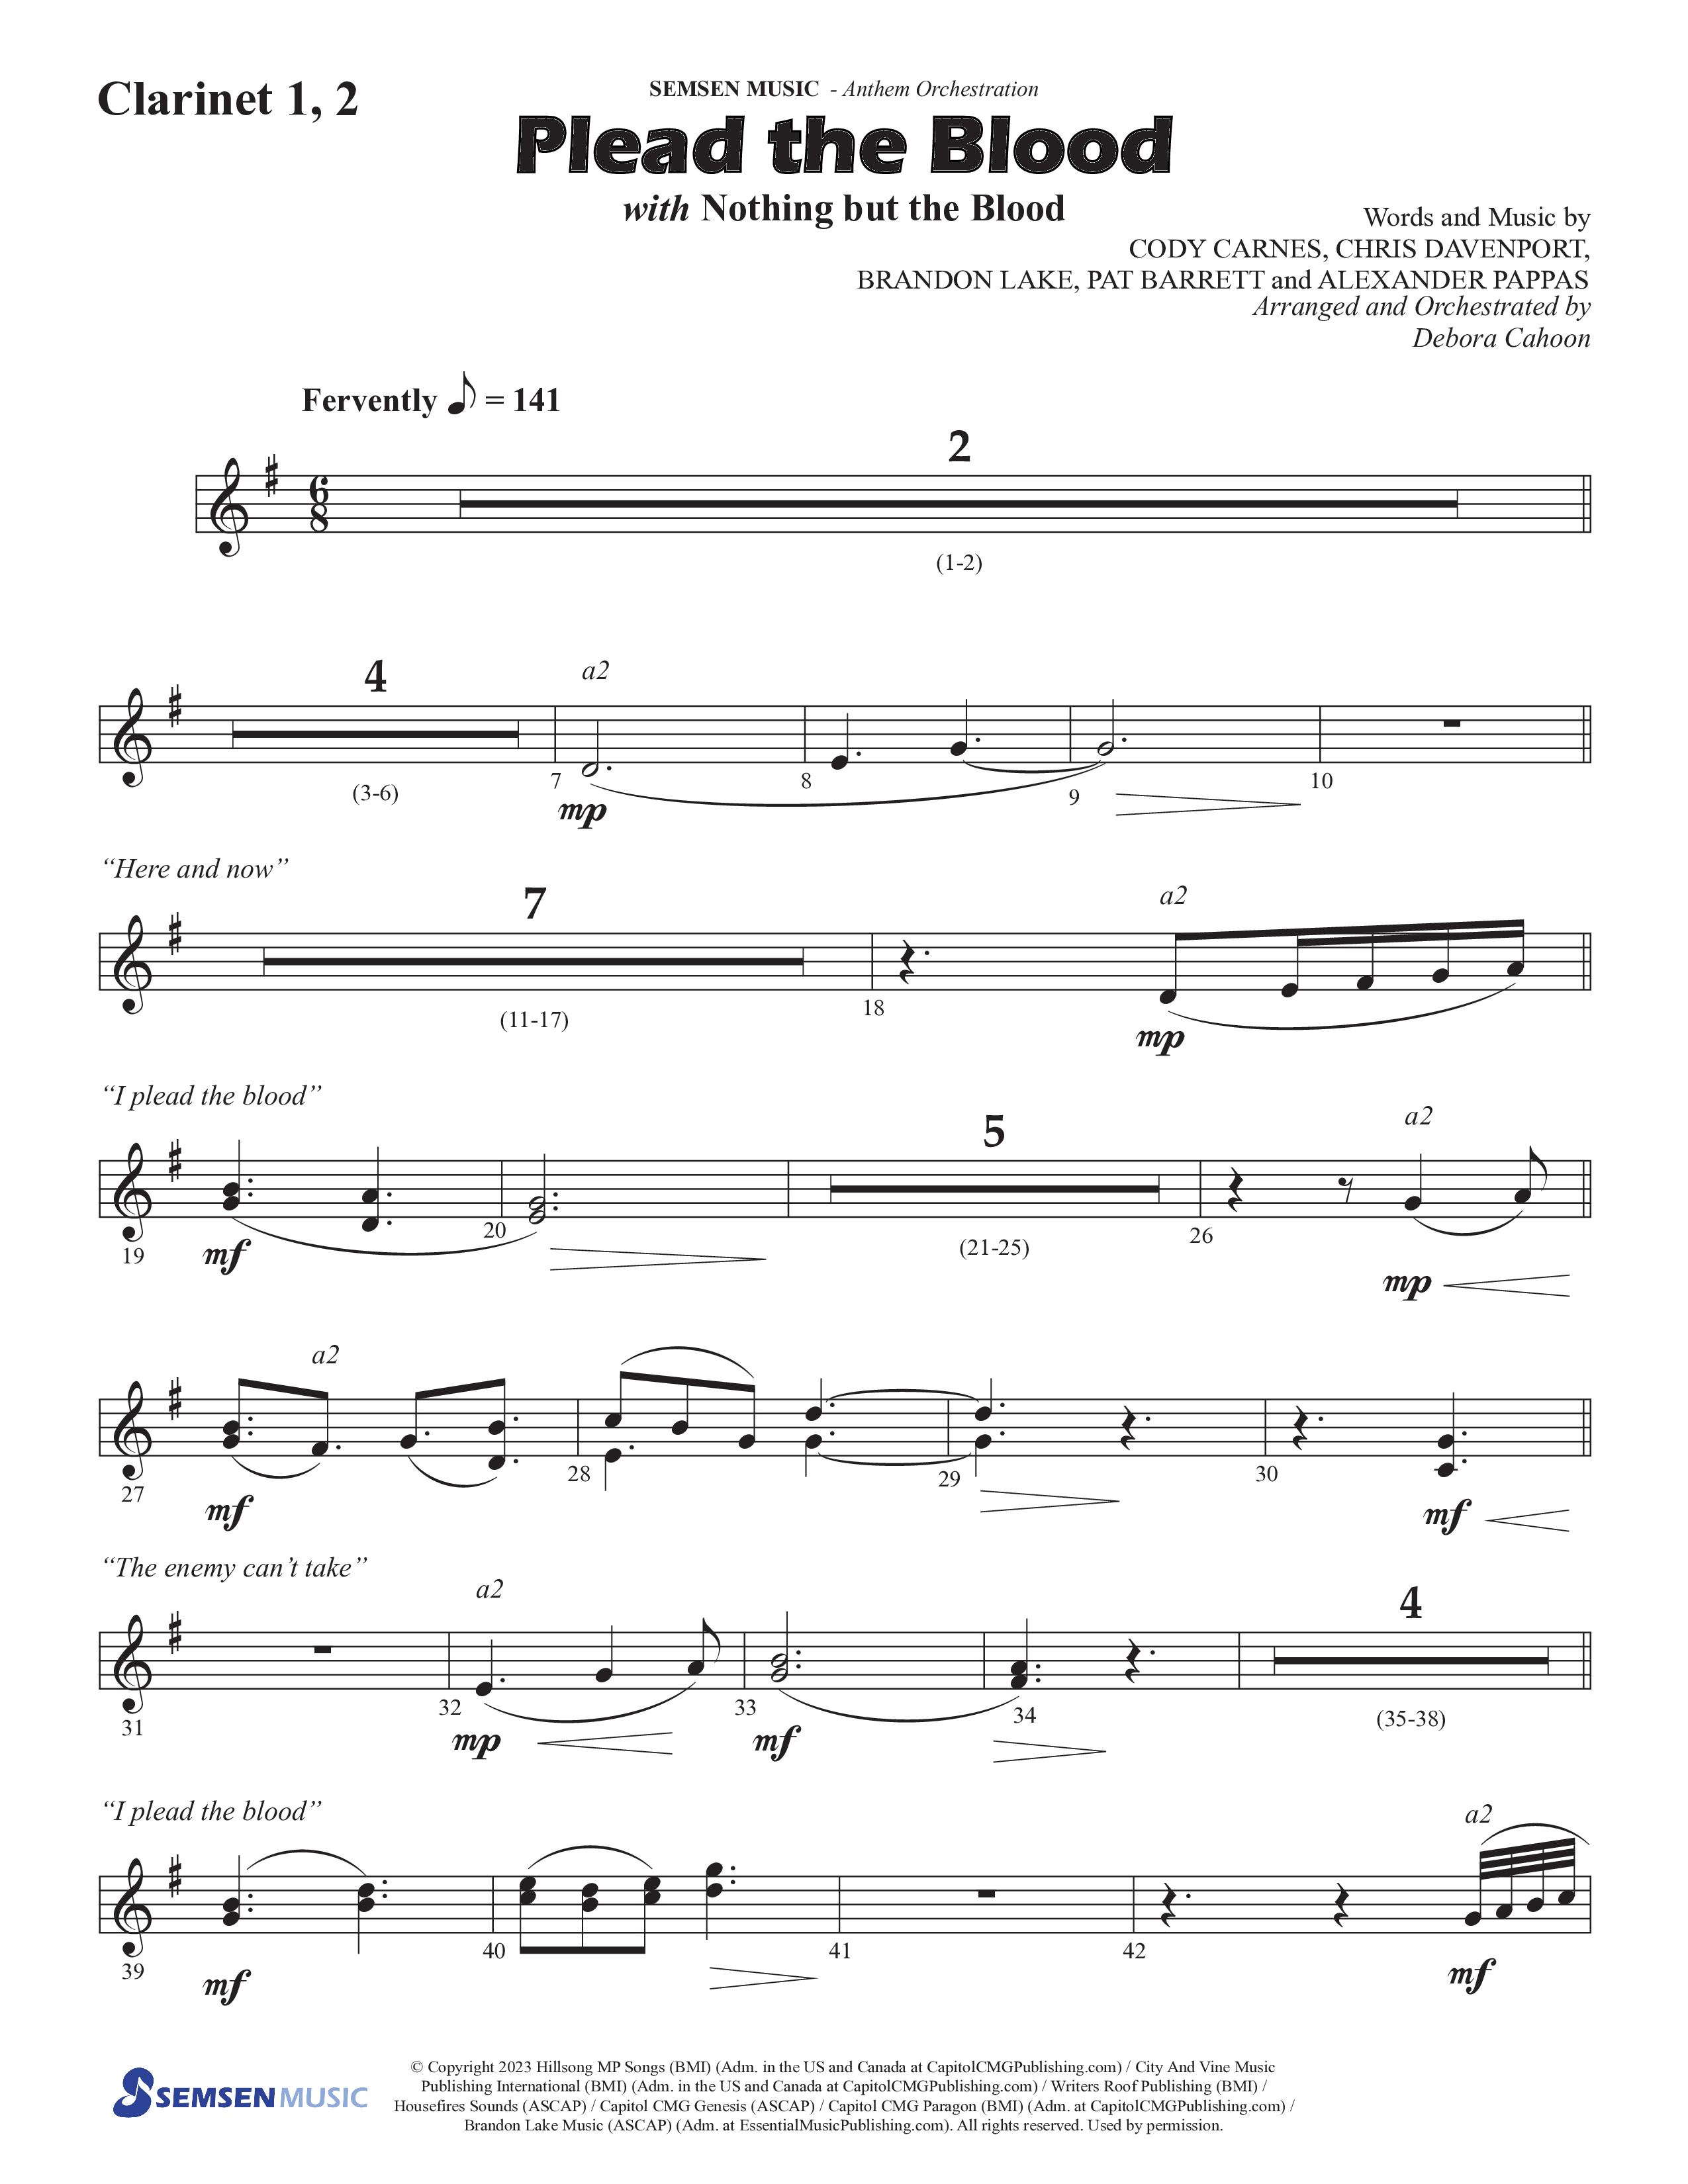 Plead The Blood (with Nothing But The Blood) (Choral Anthem SATB) Clarinet 1/2 (Semsen Music / Arr. Debora Cahoon)